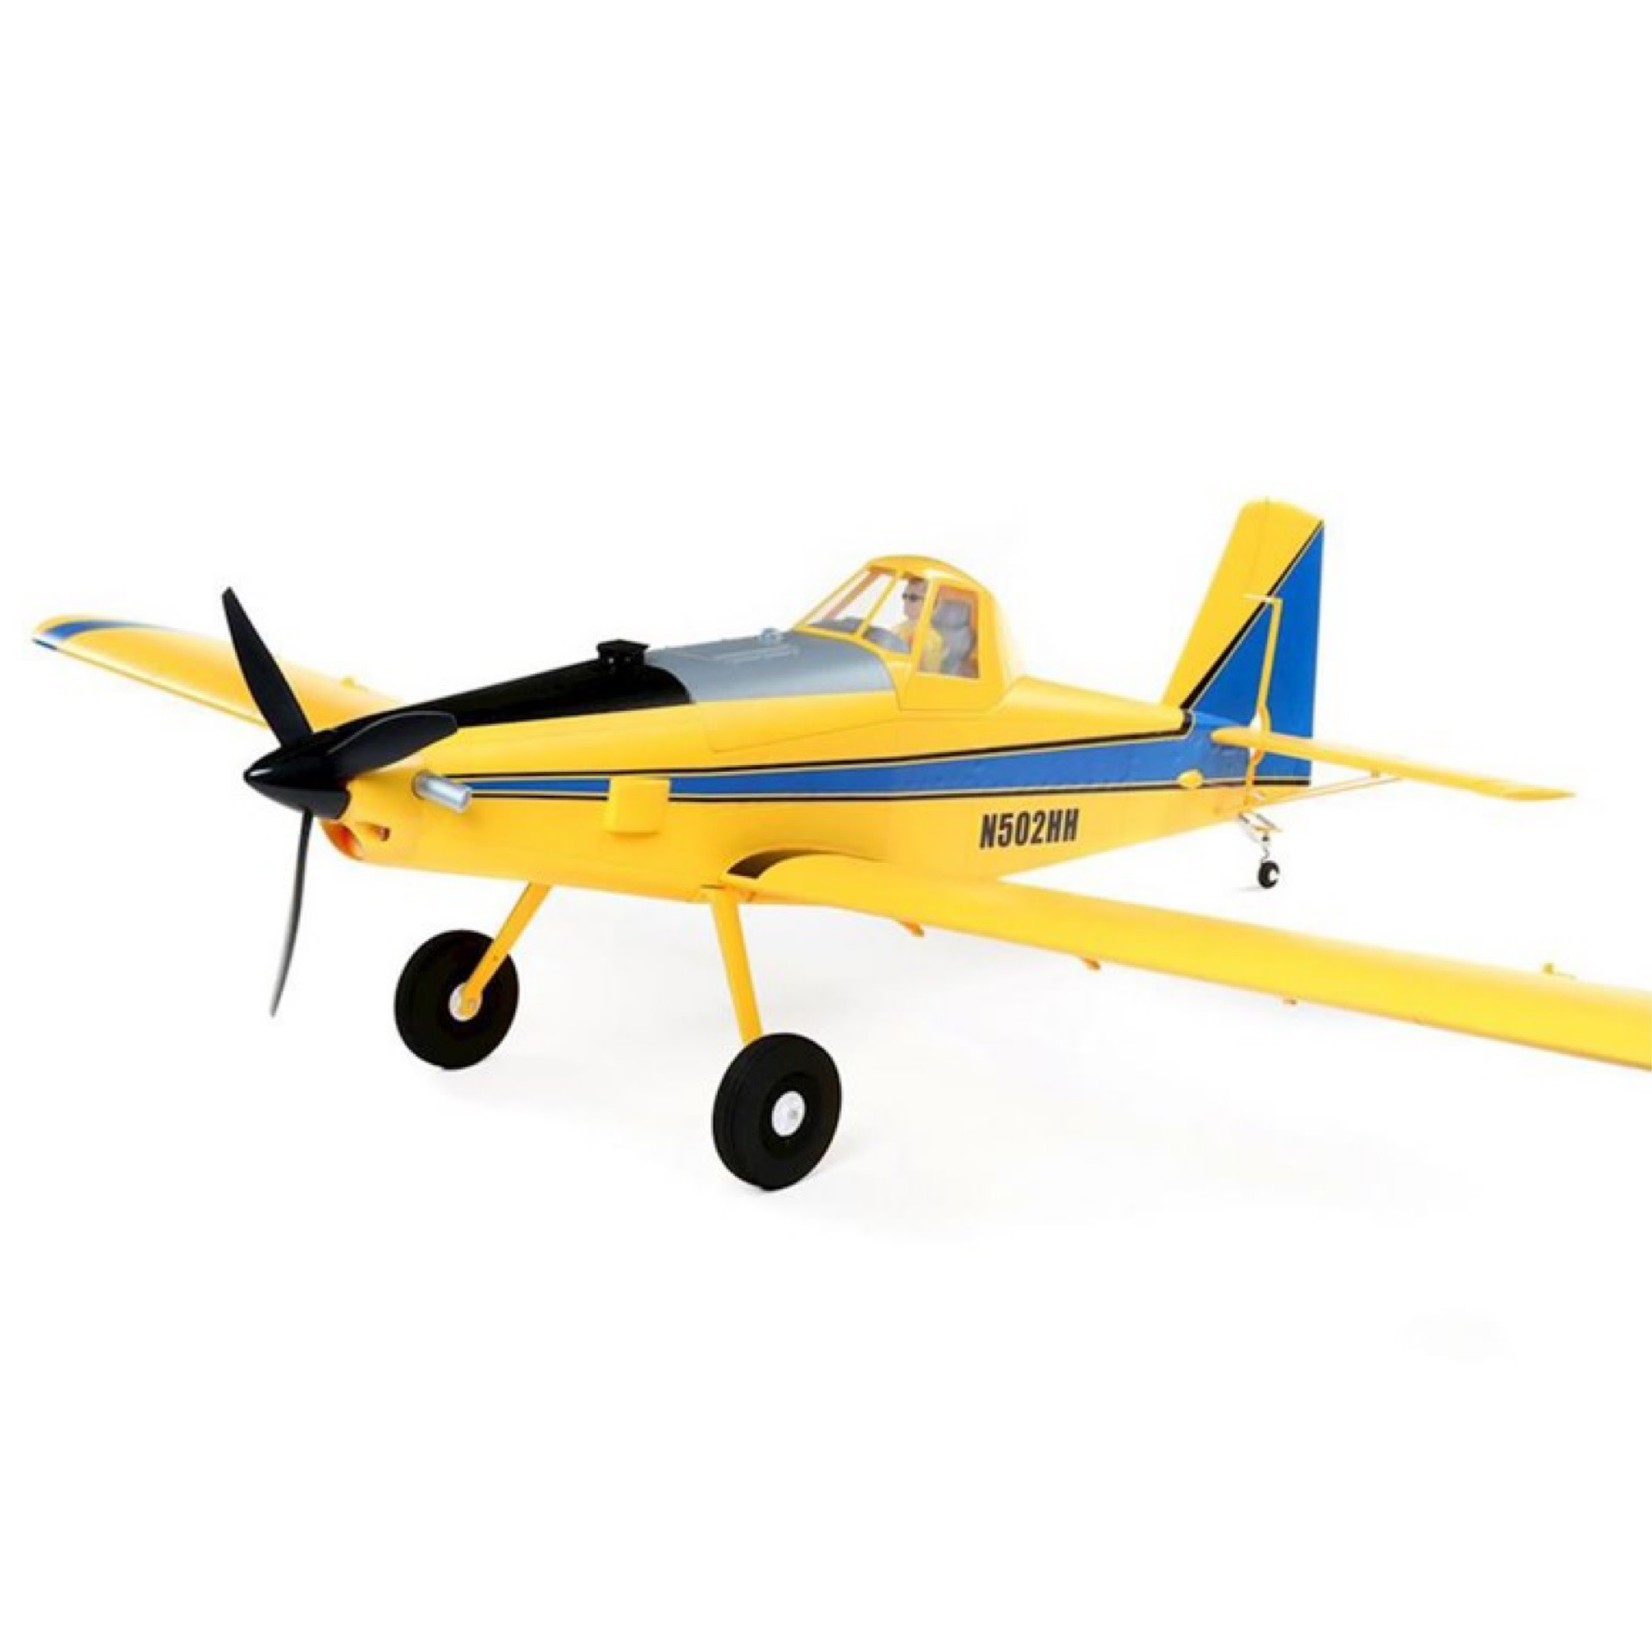 E-flite E-flite Air Tractor 1.5m BNF Electric Airplane (1555mm) w/AS3X & SAFE Select #EFL16450